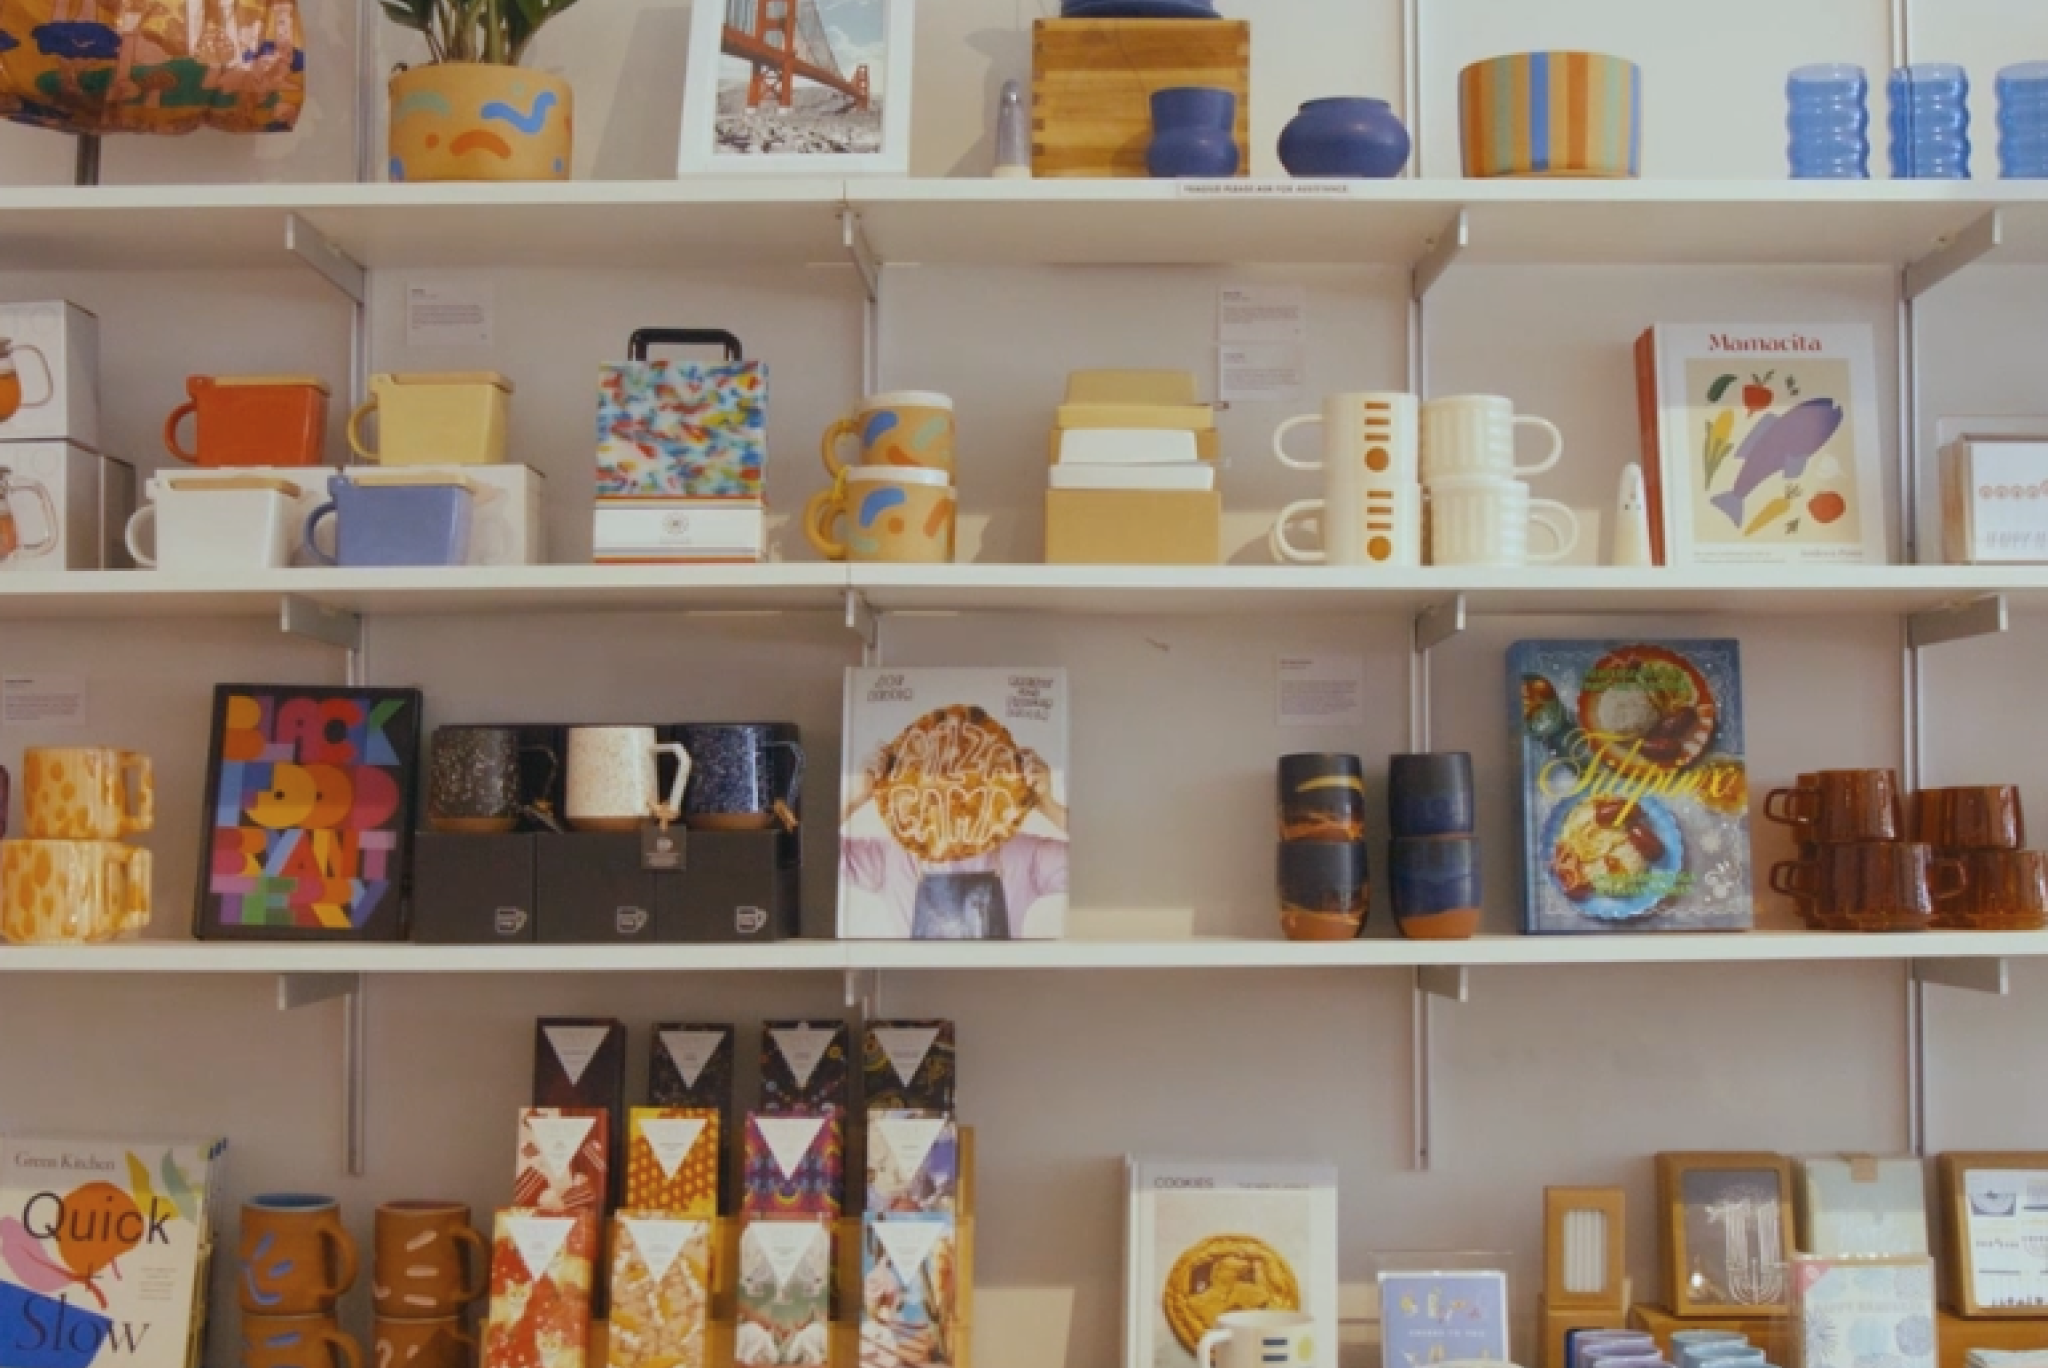 A retailer's shelves are shown fully stocked with Faire-sourced products